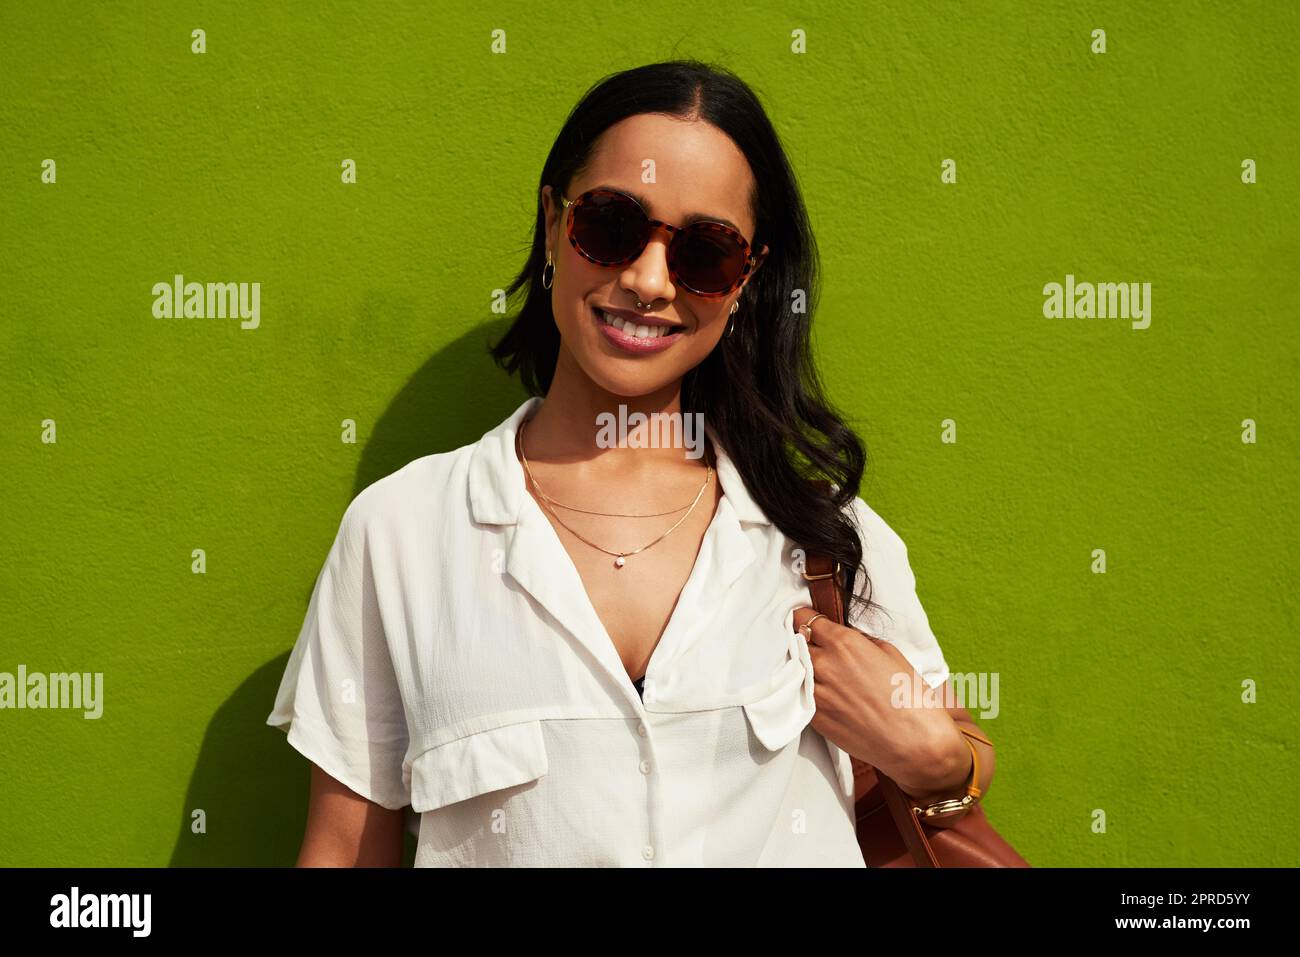 Living life the way I want to. Cropped portrait of an attractive young woman wearing sunglasses while standing alone against a green background in the city. Stock Photo